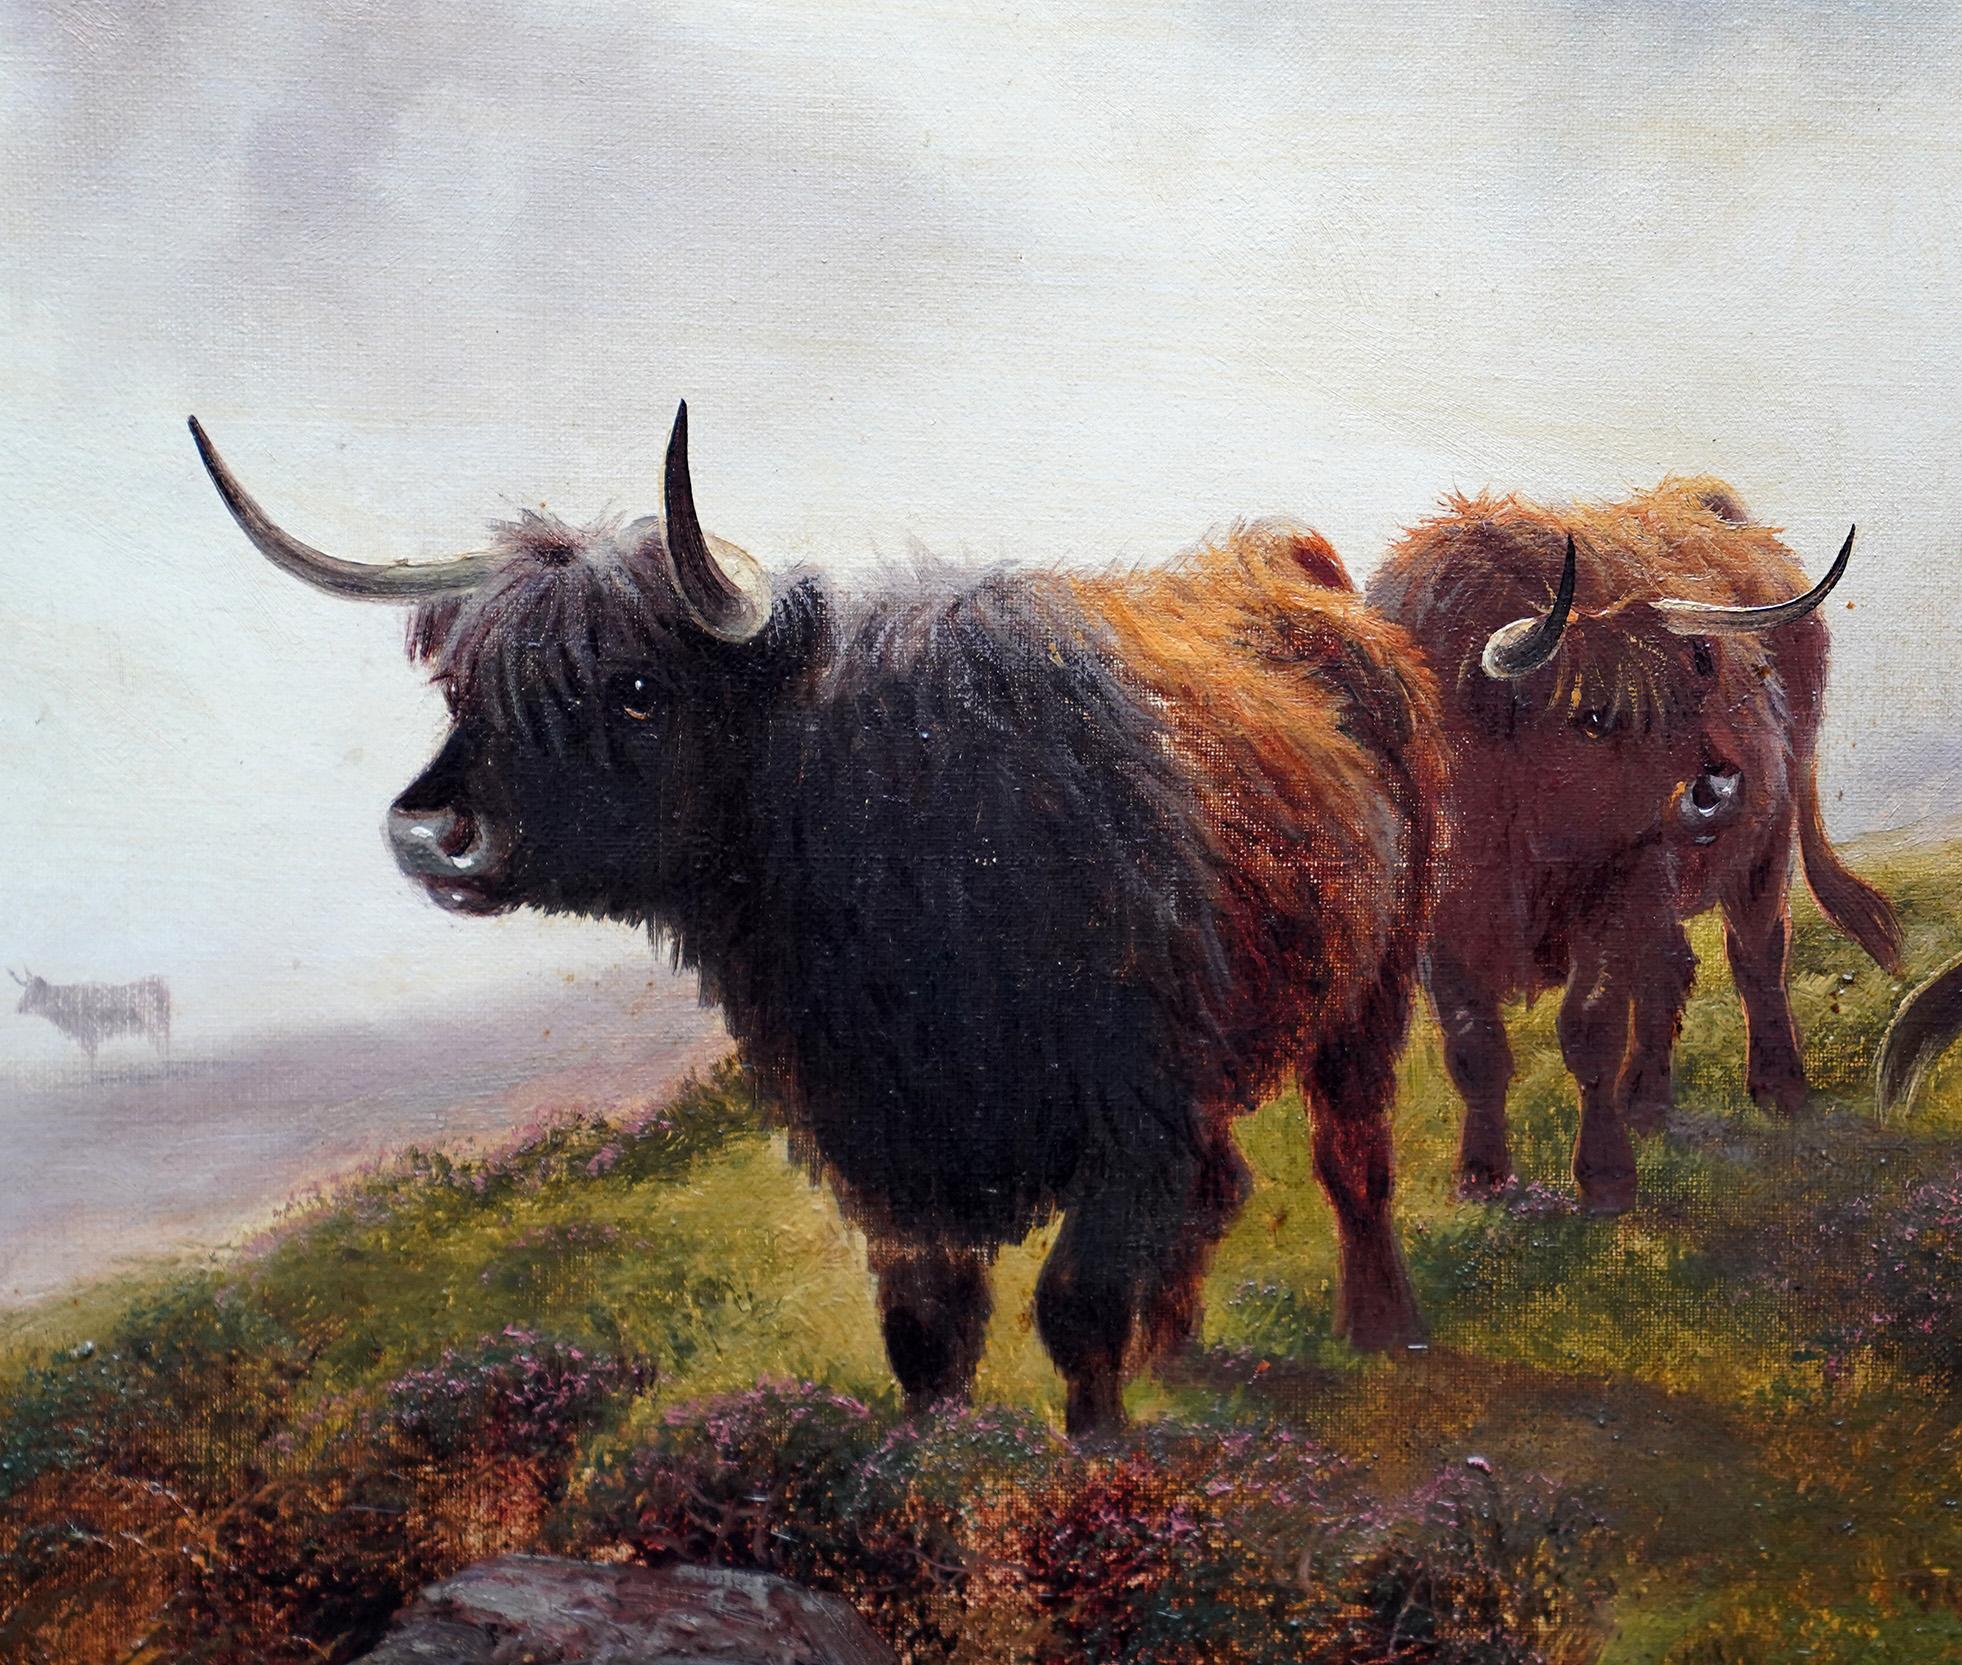 Ben Lomond Scotland Cattle in Mist - British 19thC art landscape oil painting - Realist Painting by Henry Robinson Hall